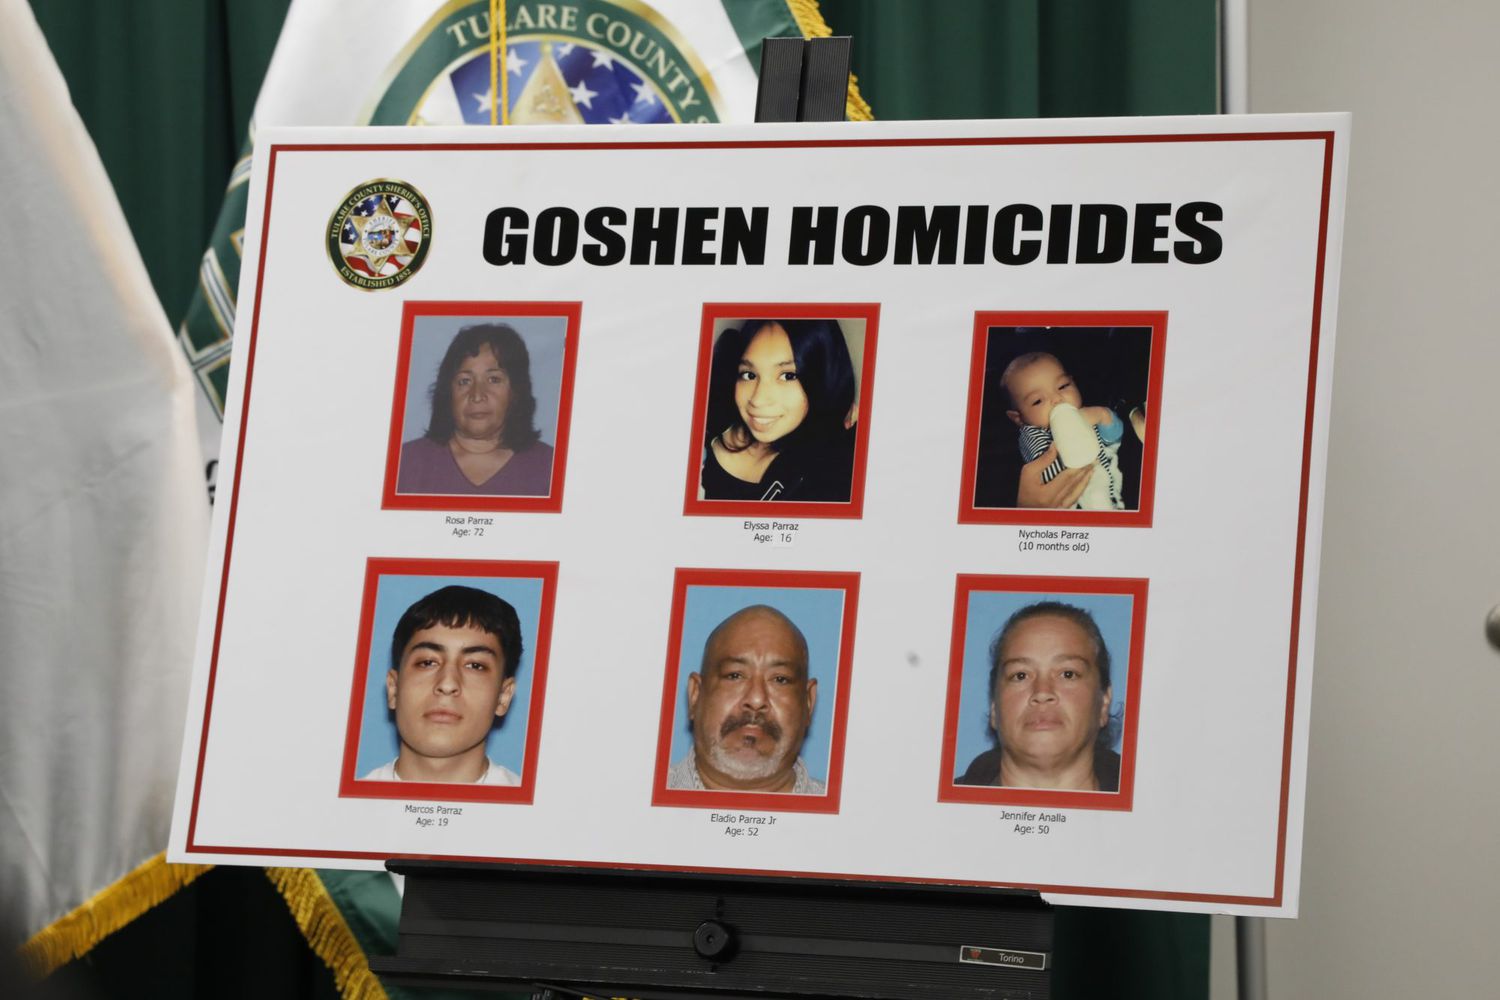 Six people were killed at a home in Goshen, California over the MLK holiday weekend